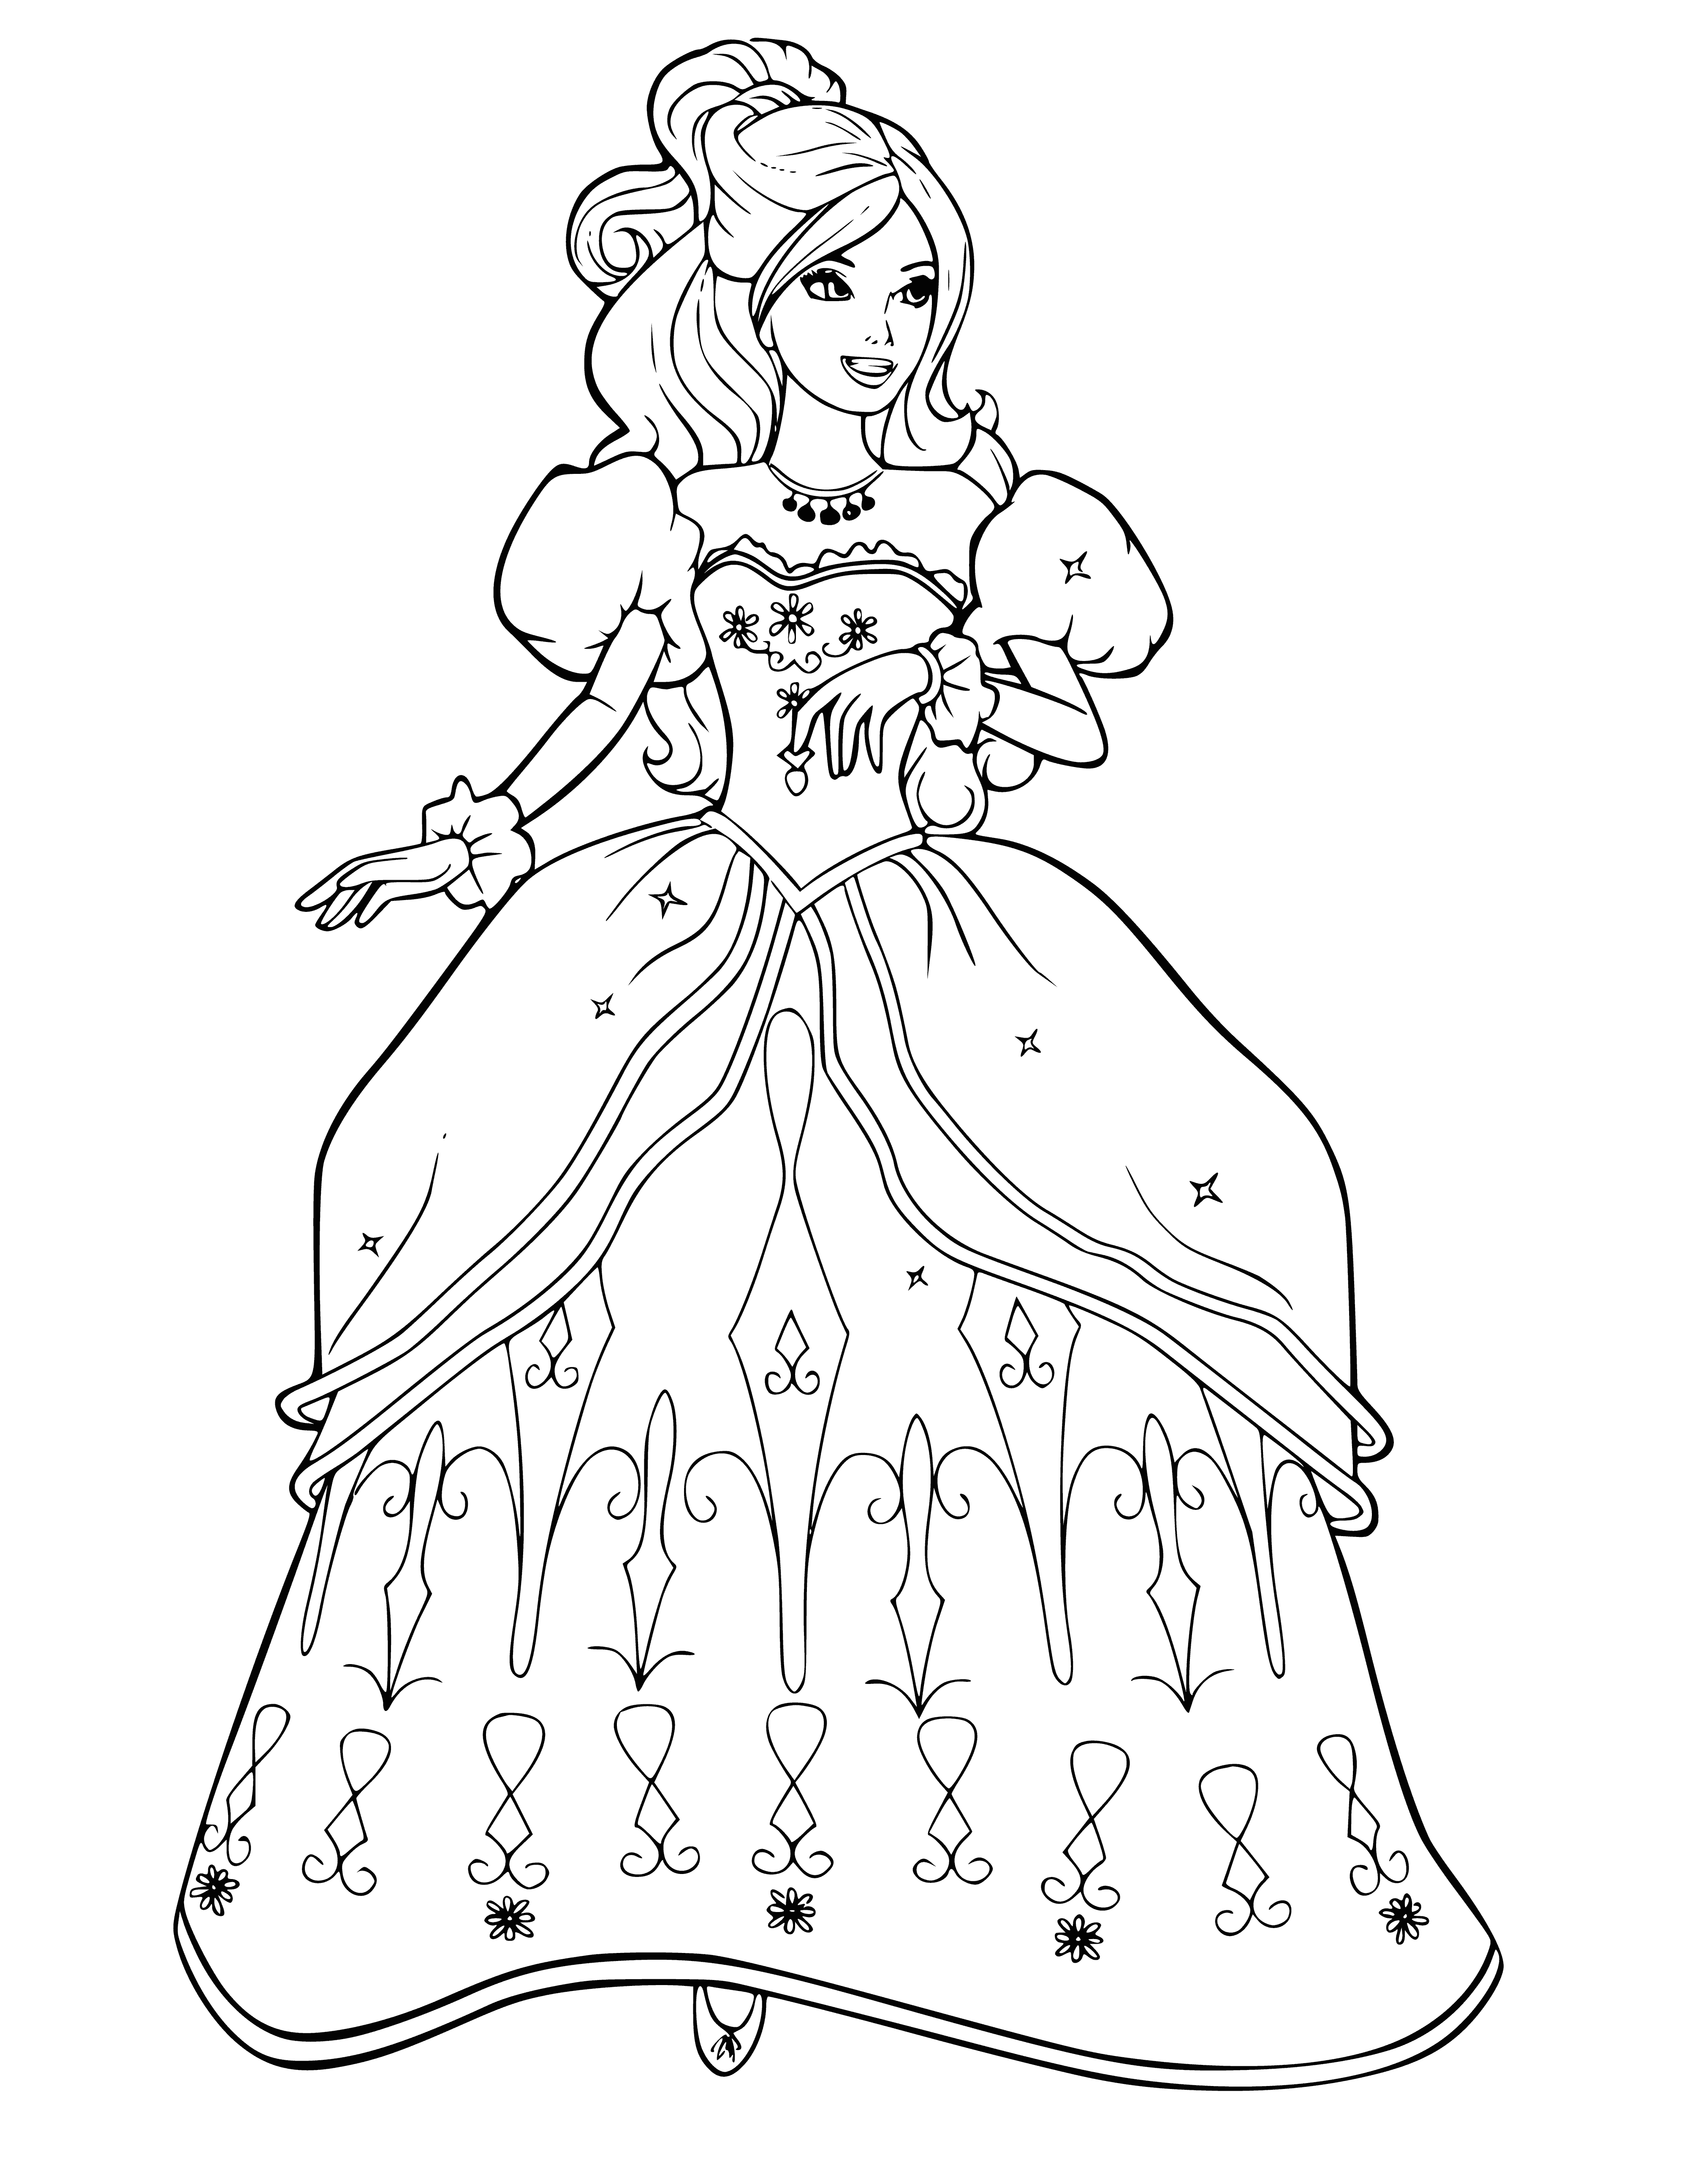 Barbie in a fluffy dress coloring page